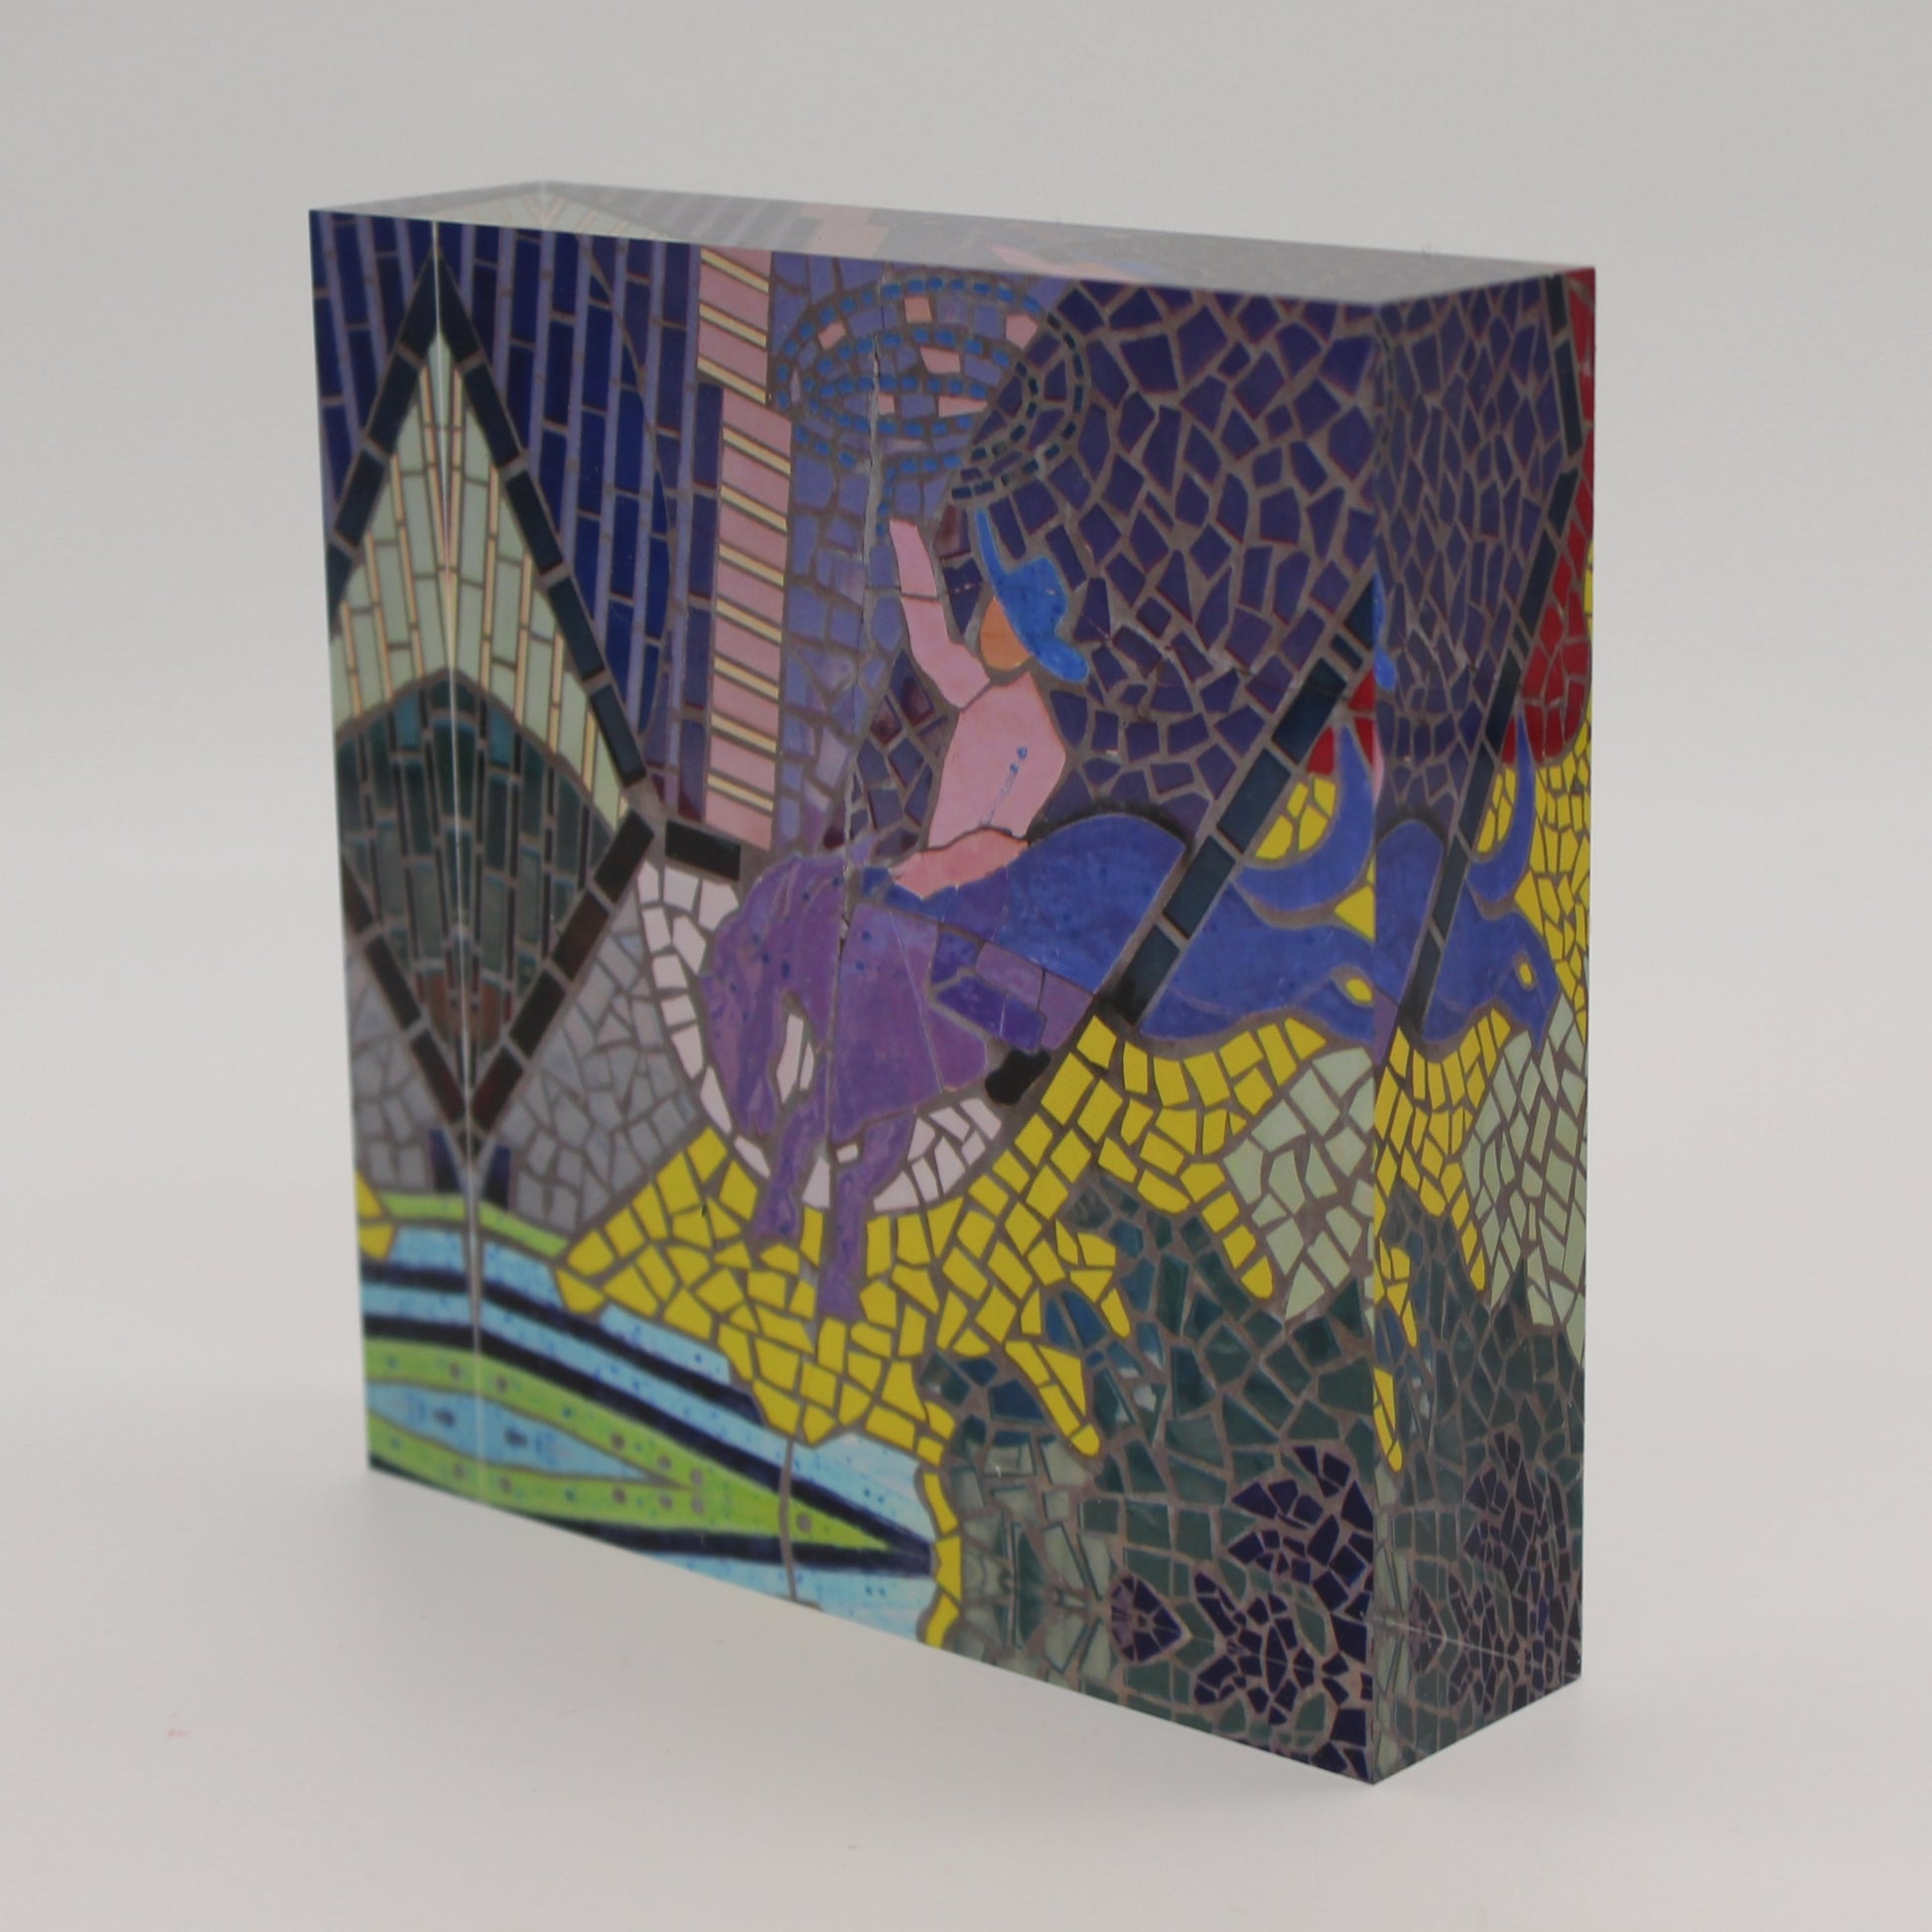 Tilted view of Acrylic block with mosaic tiles depicting a cowboy on a bucking bronco